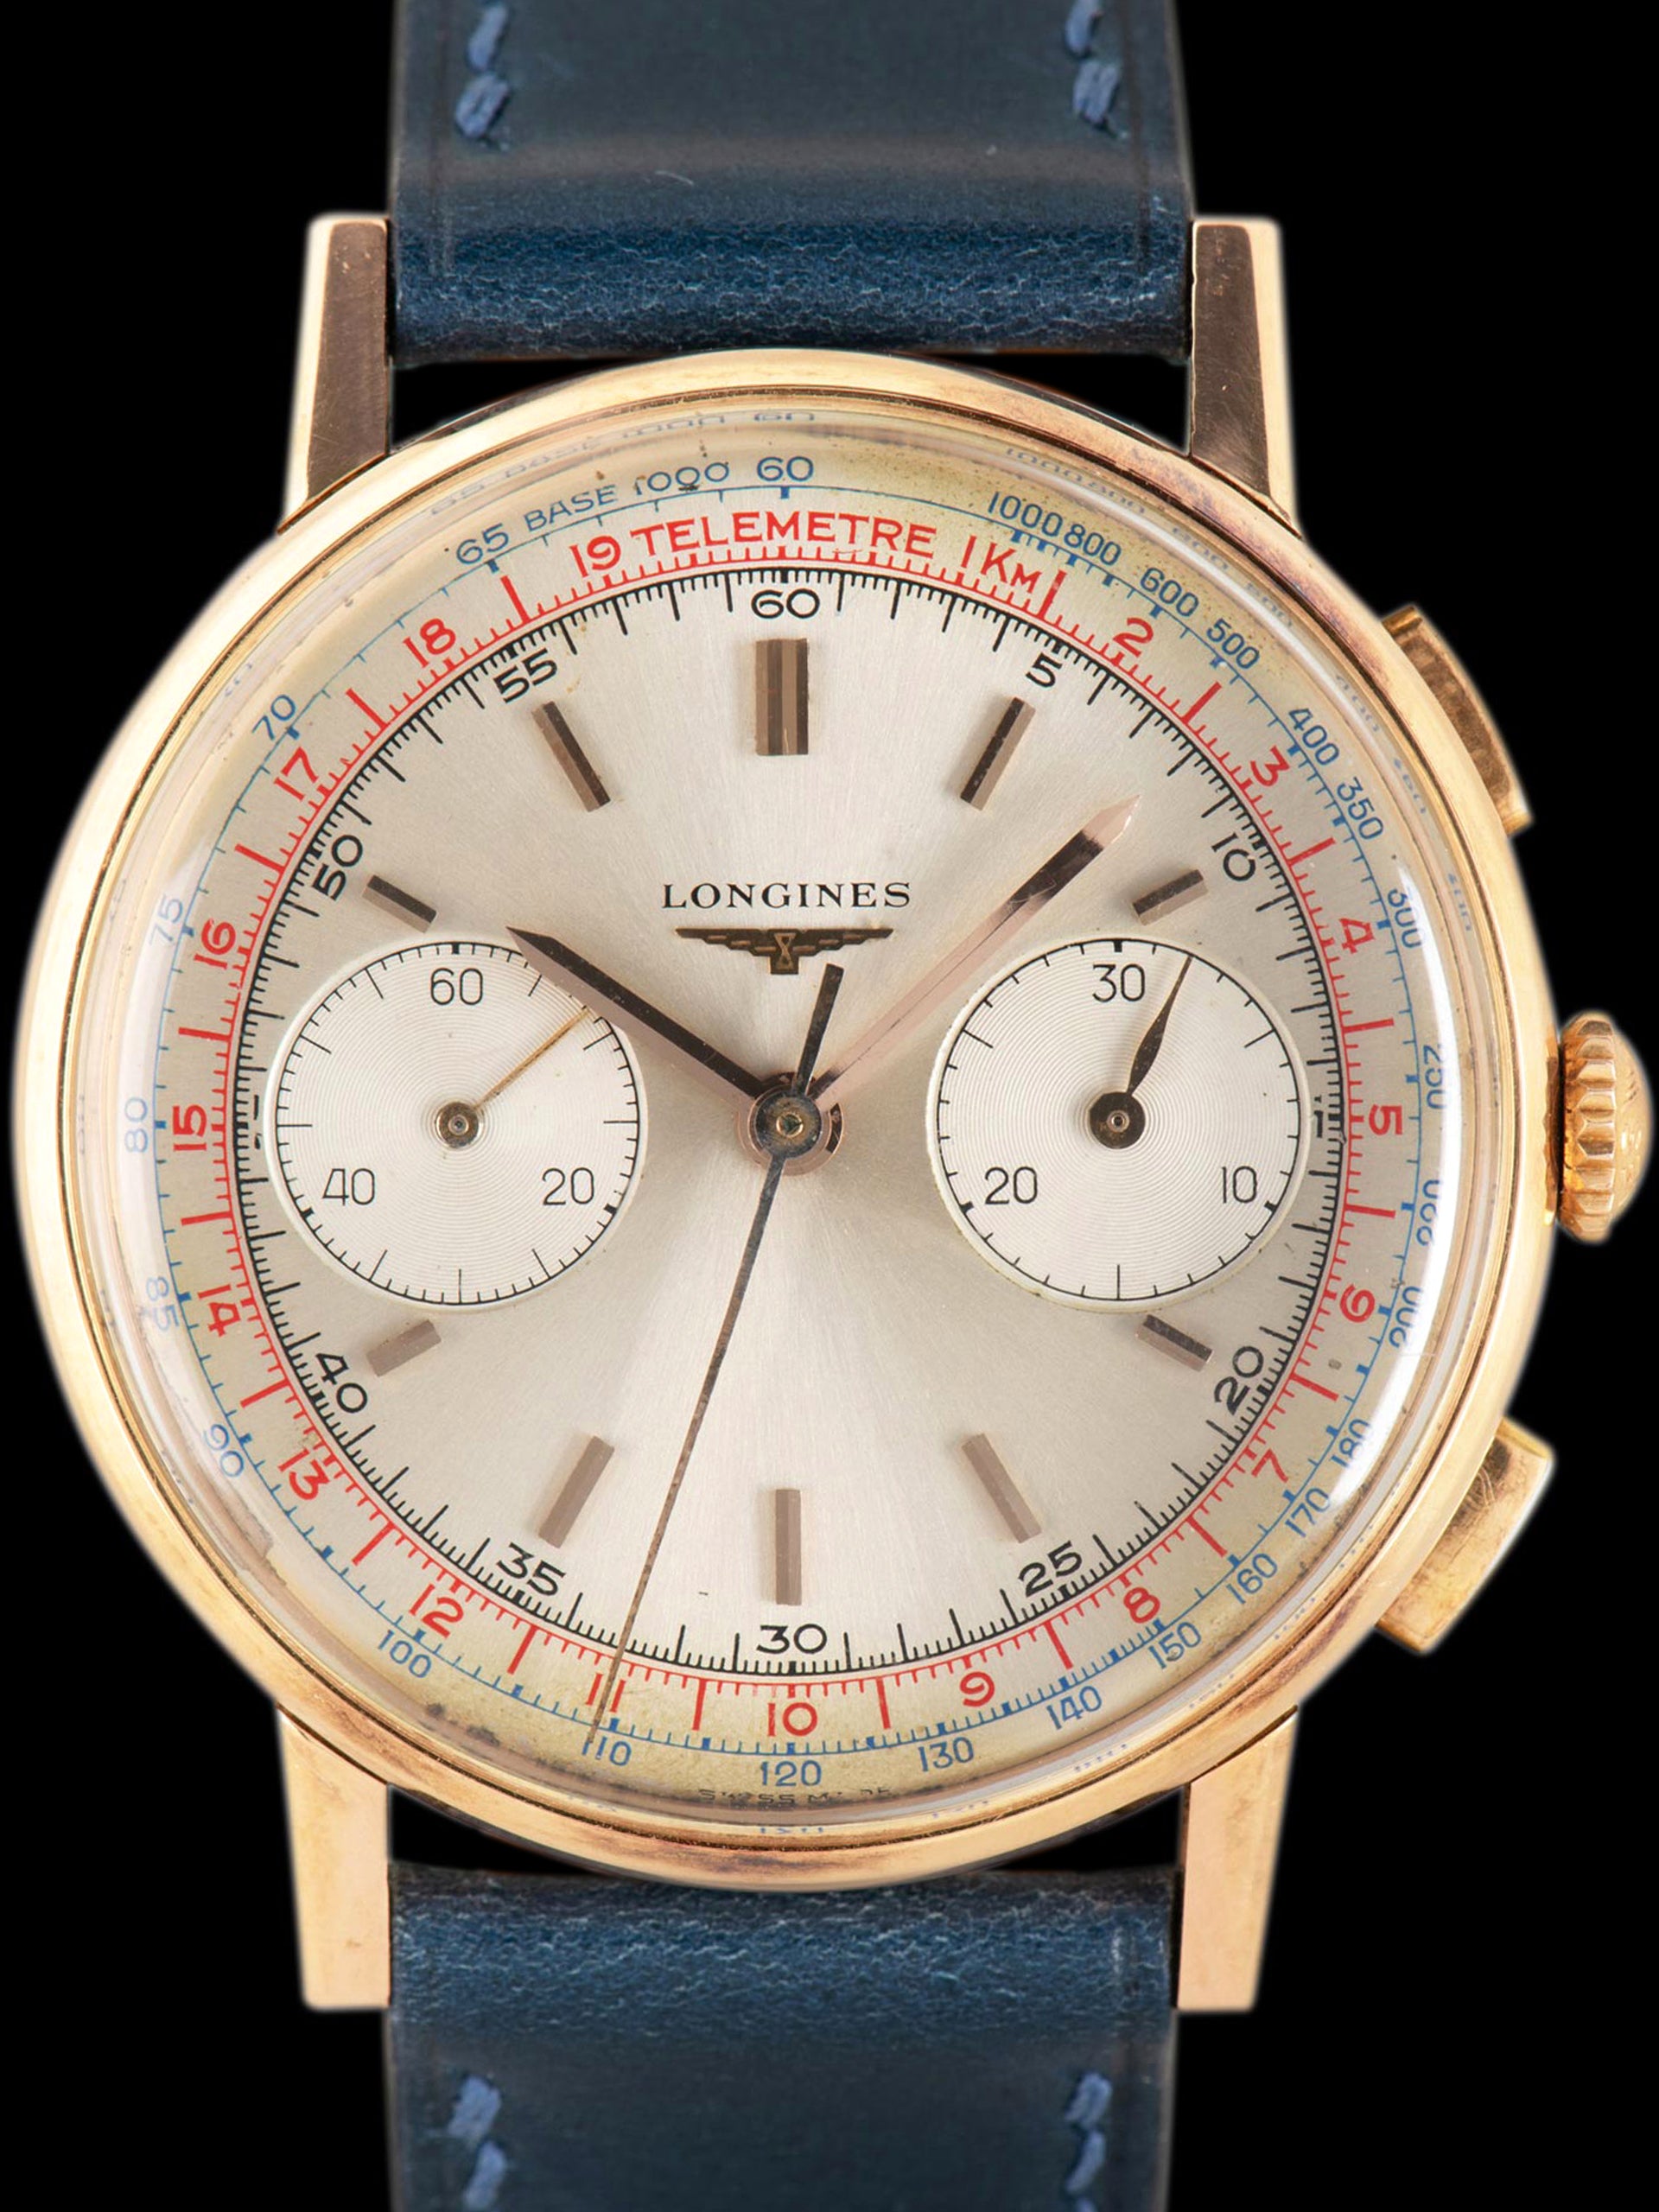 1966 Longines Flyback Chronograph 18K RG (Ref. 7414 3) Cal. 30CH